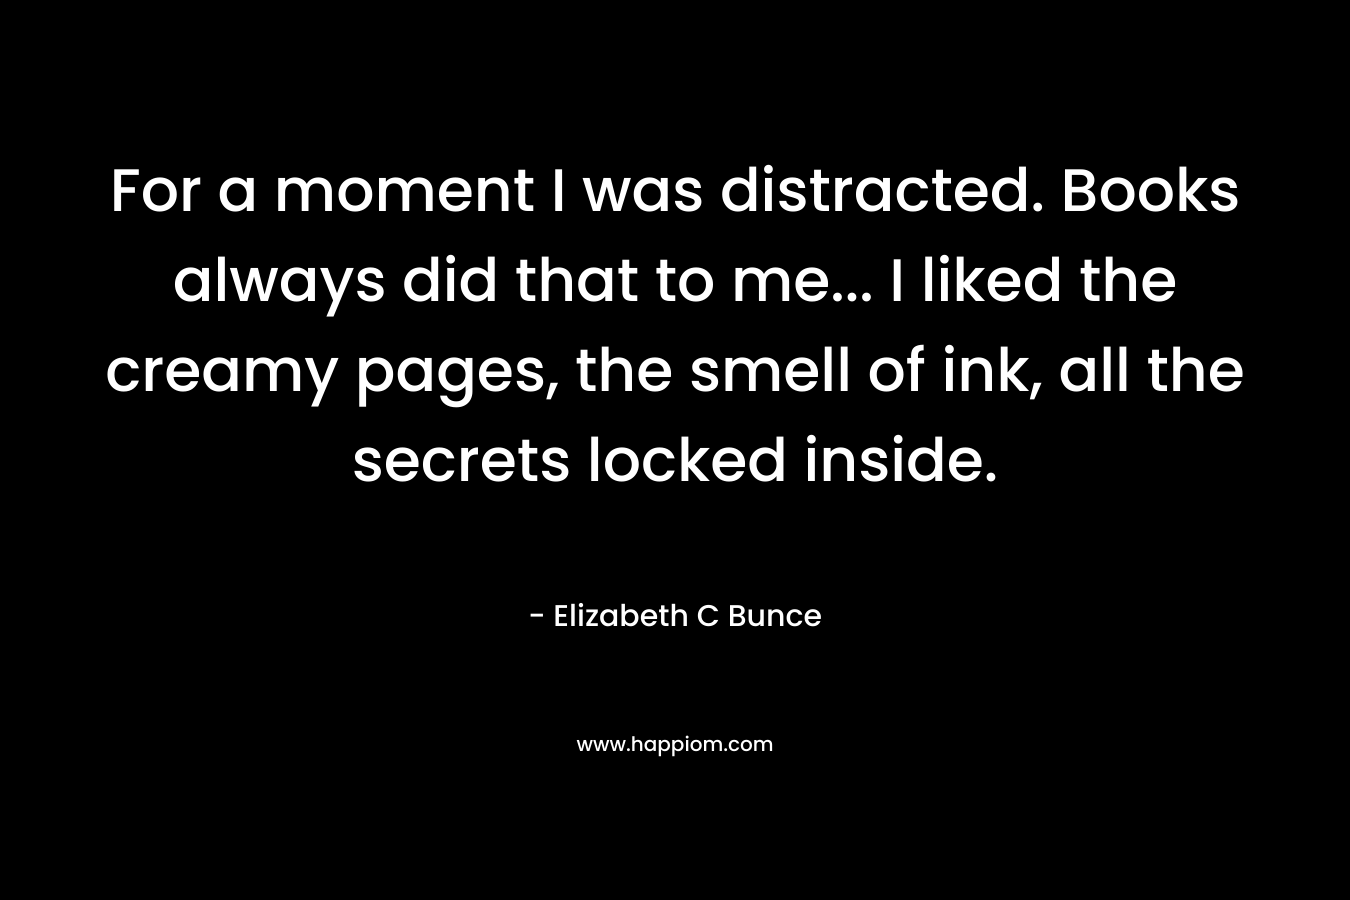 For a moment I was distracted. Books always did that to me… I liked the creamy pages, the smell of ink, all the secrets locked inside. – Elizabeth C Bunce